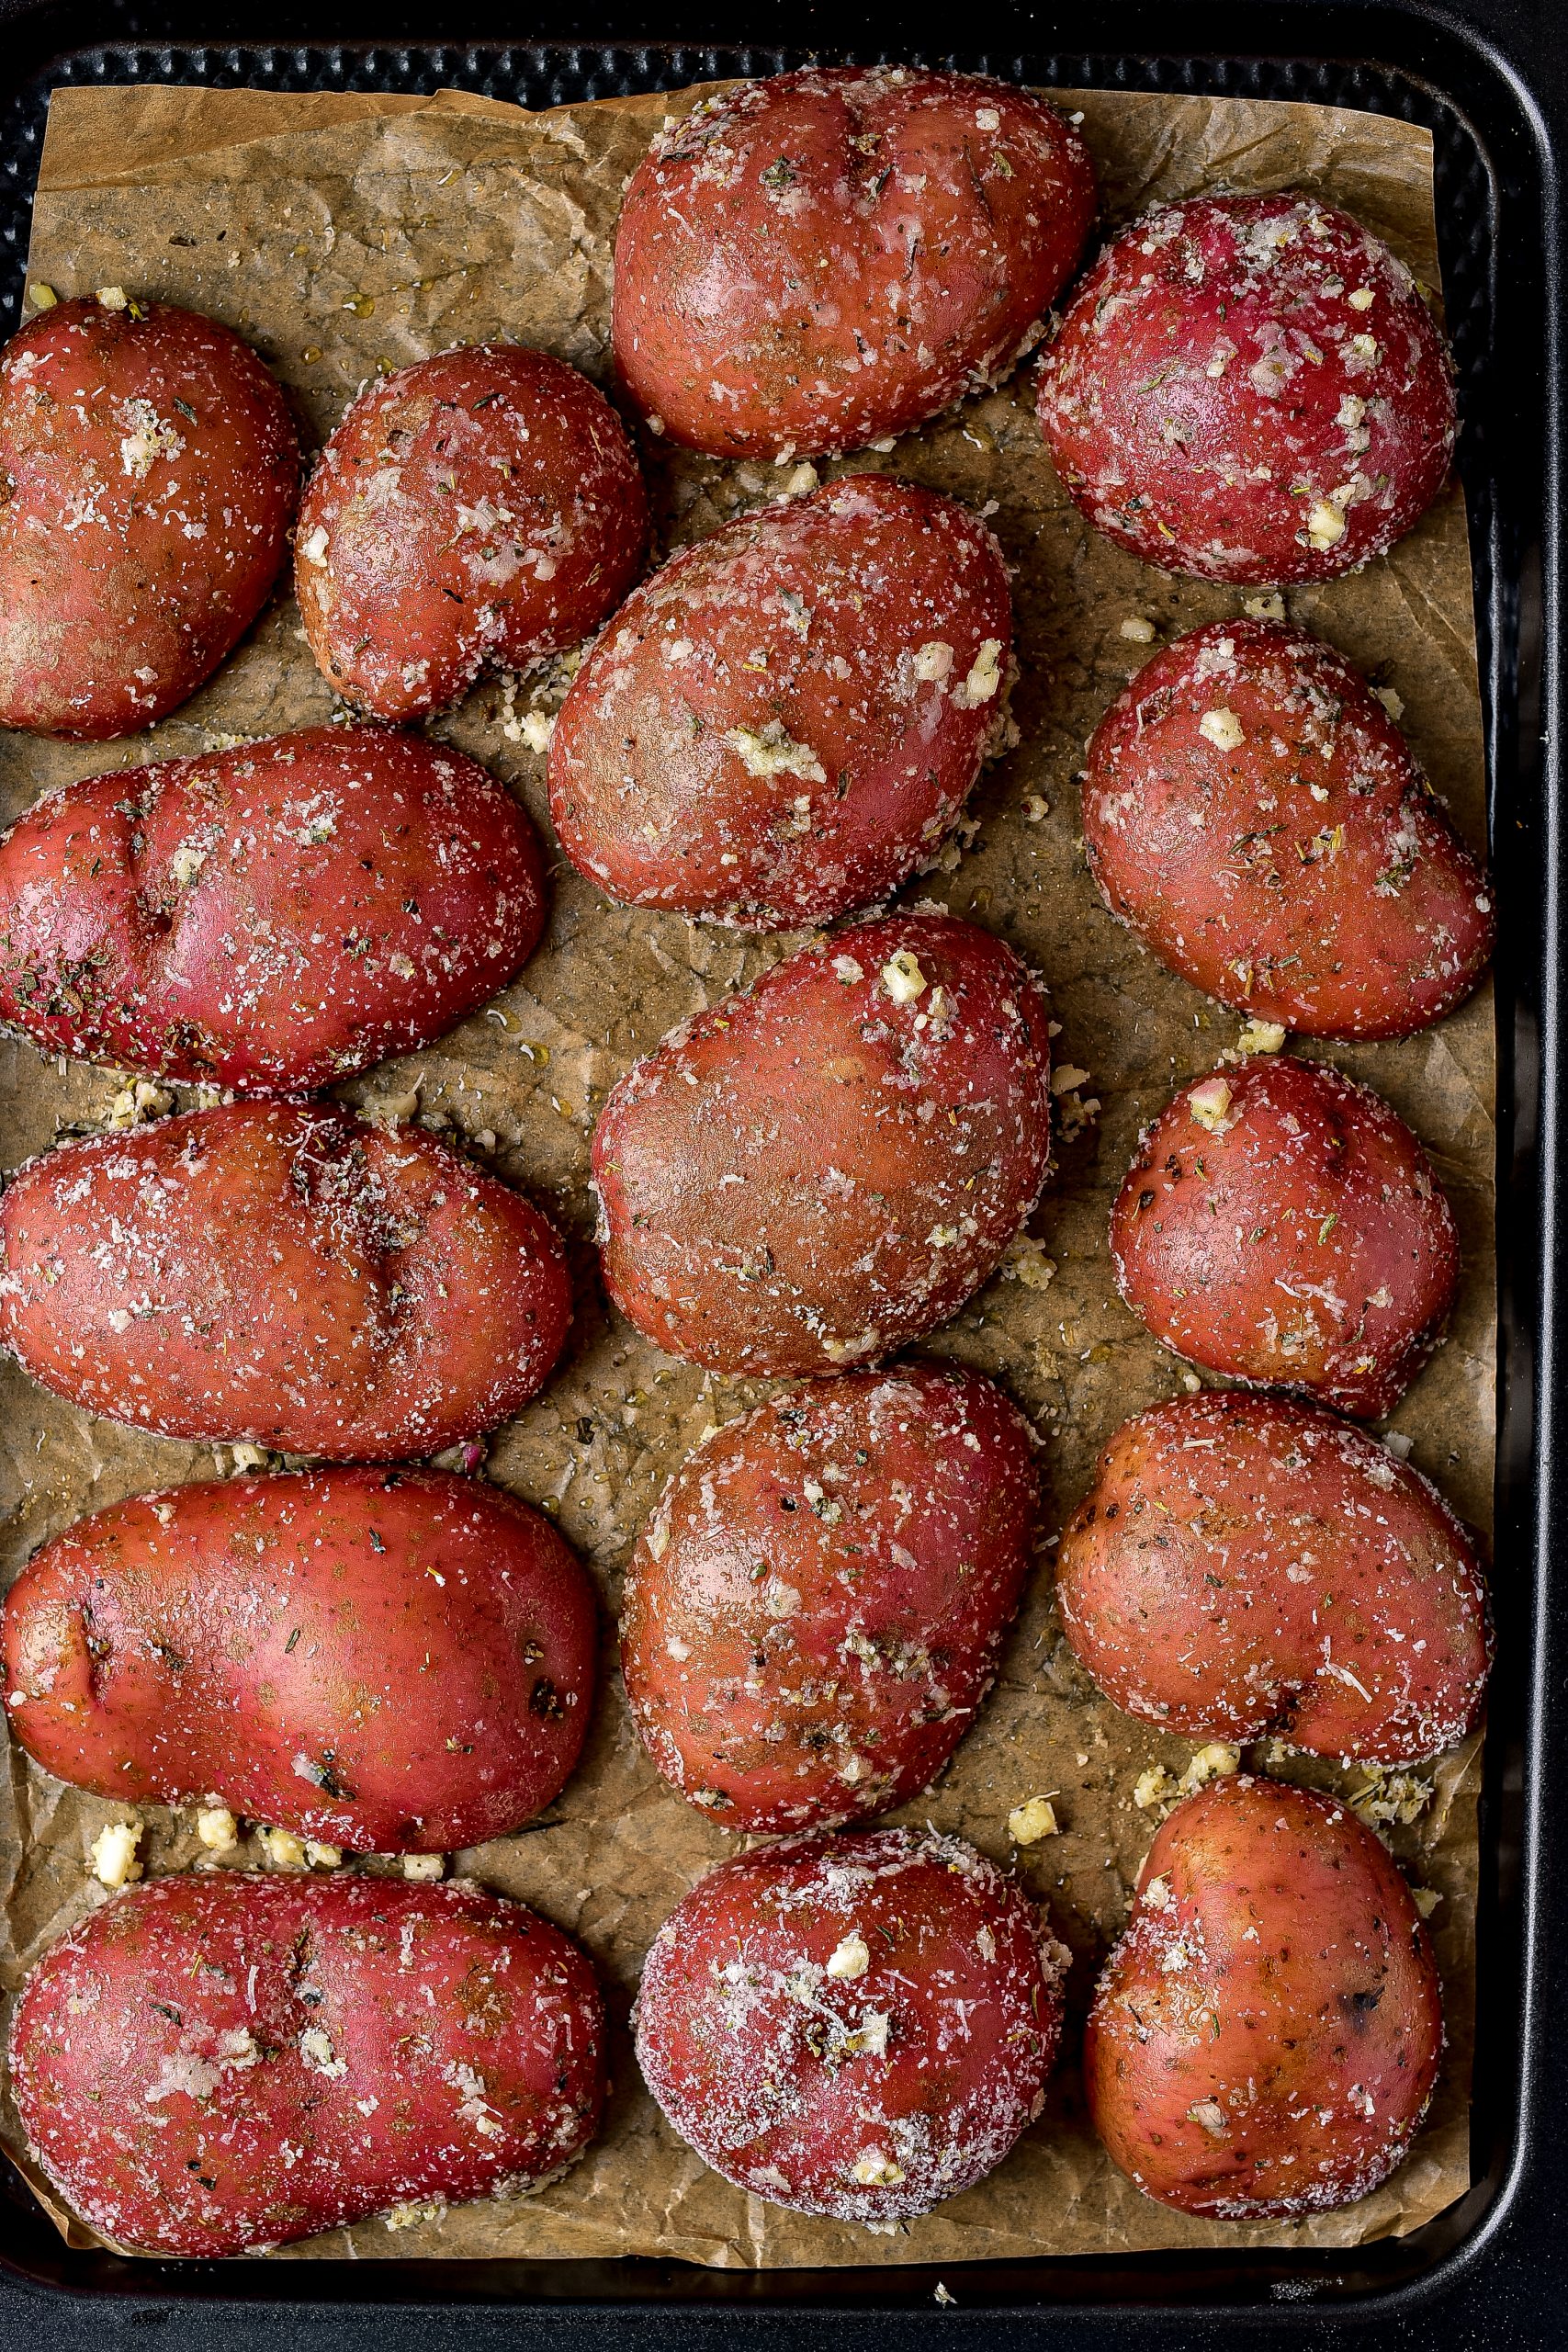 arrange the potatoes on the baking sheet in an even layer. Place the potatoes peel side up.